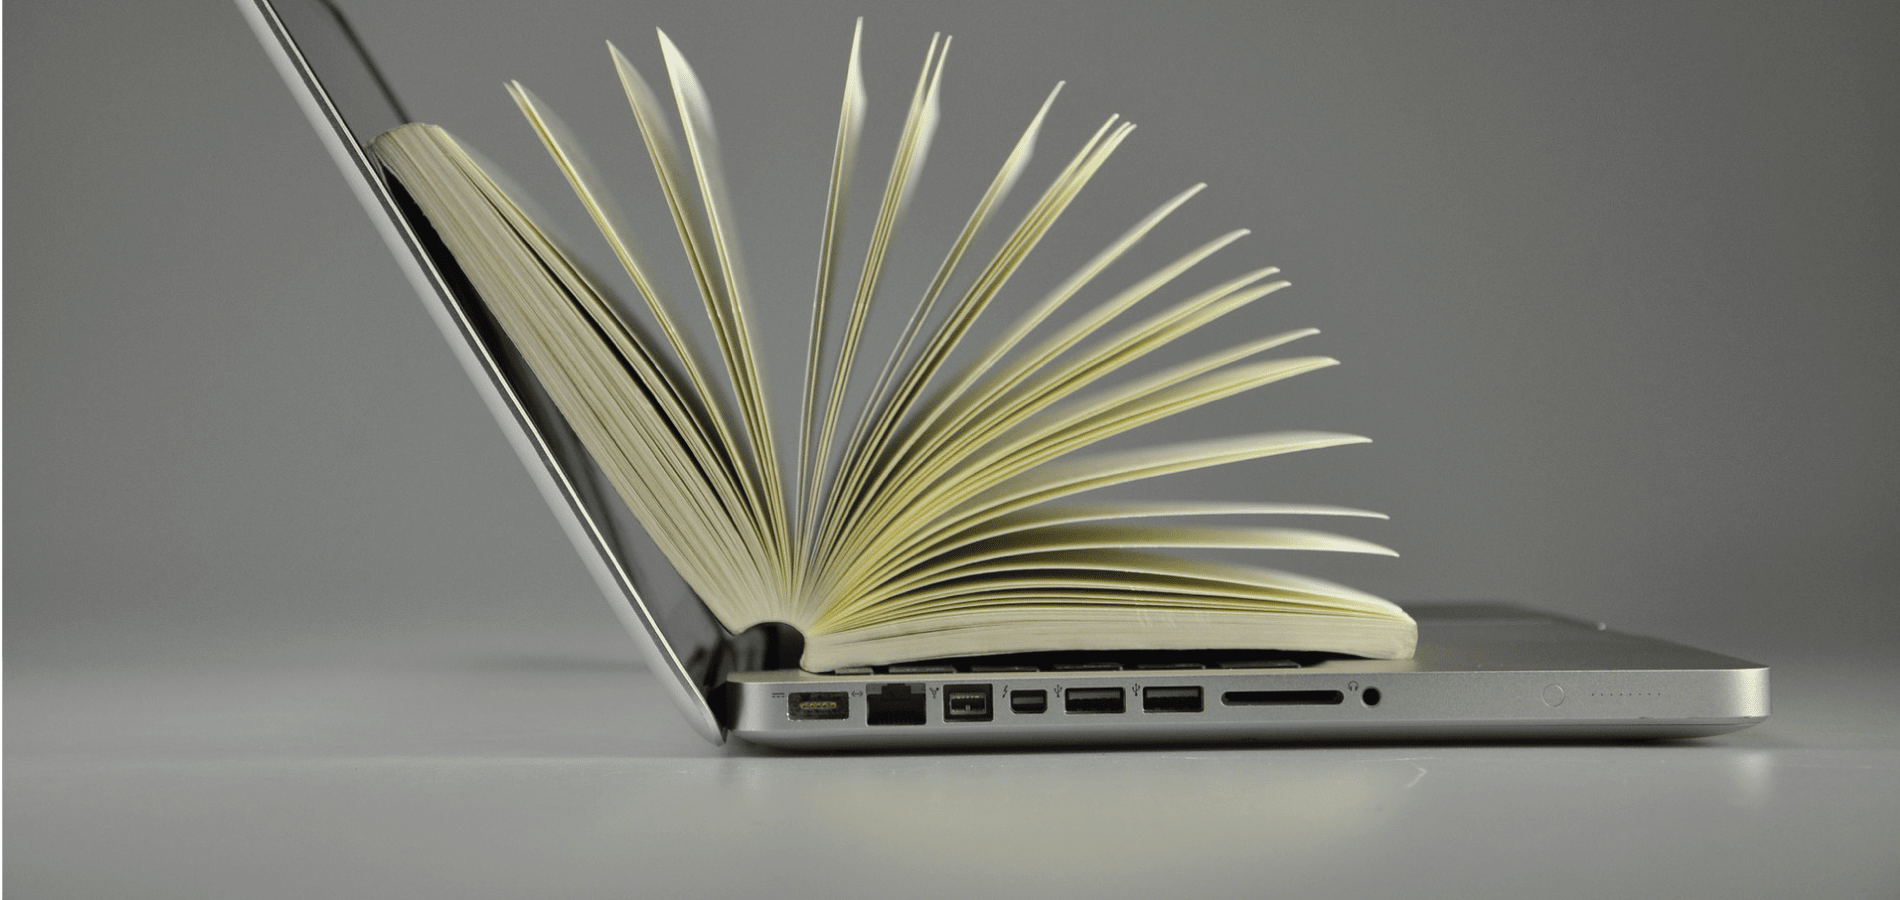 Book on top of a laptop